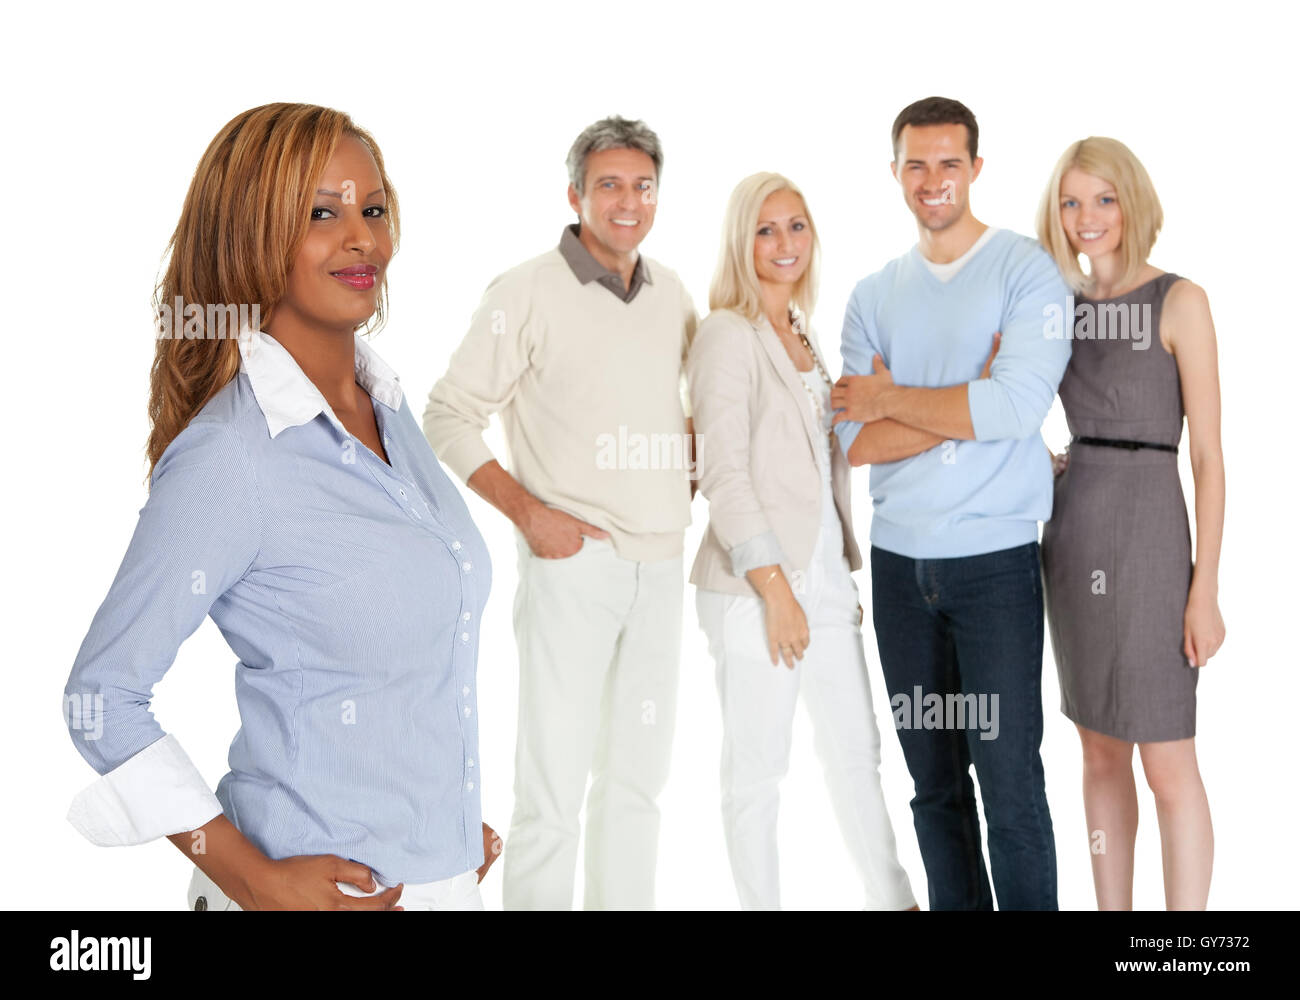 African American woman with group of people Stock Photo